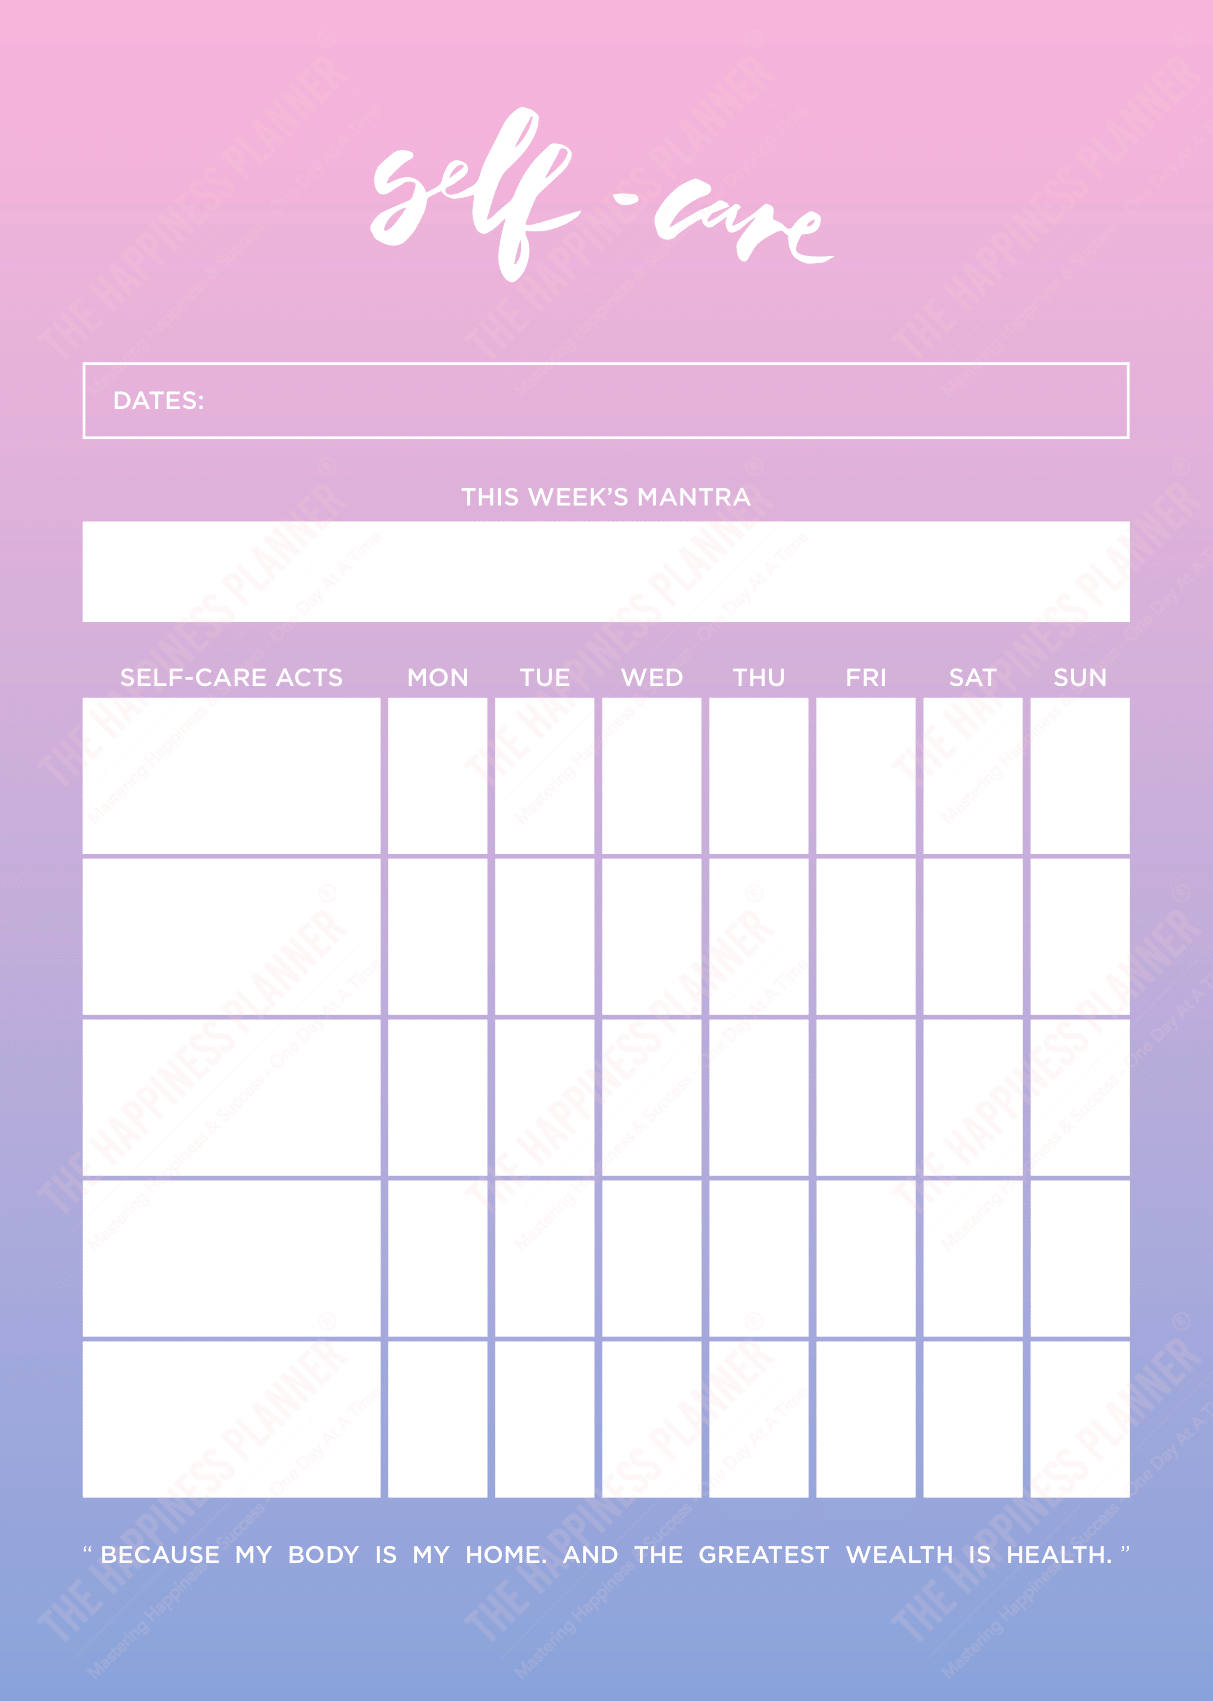 Premium Printables: #SelfLove/SelfCare - The Happiness Planner®